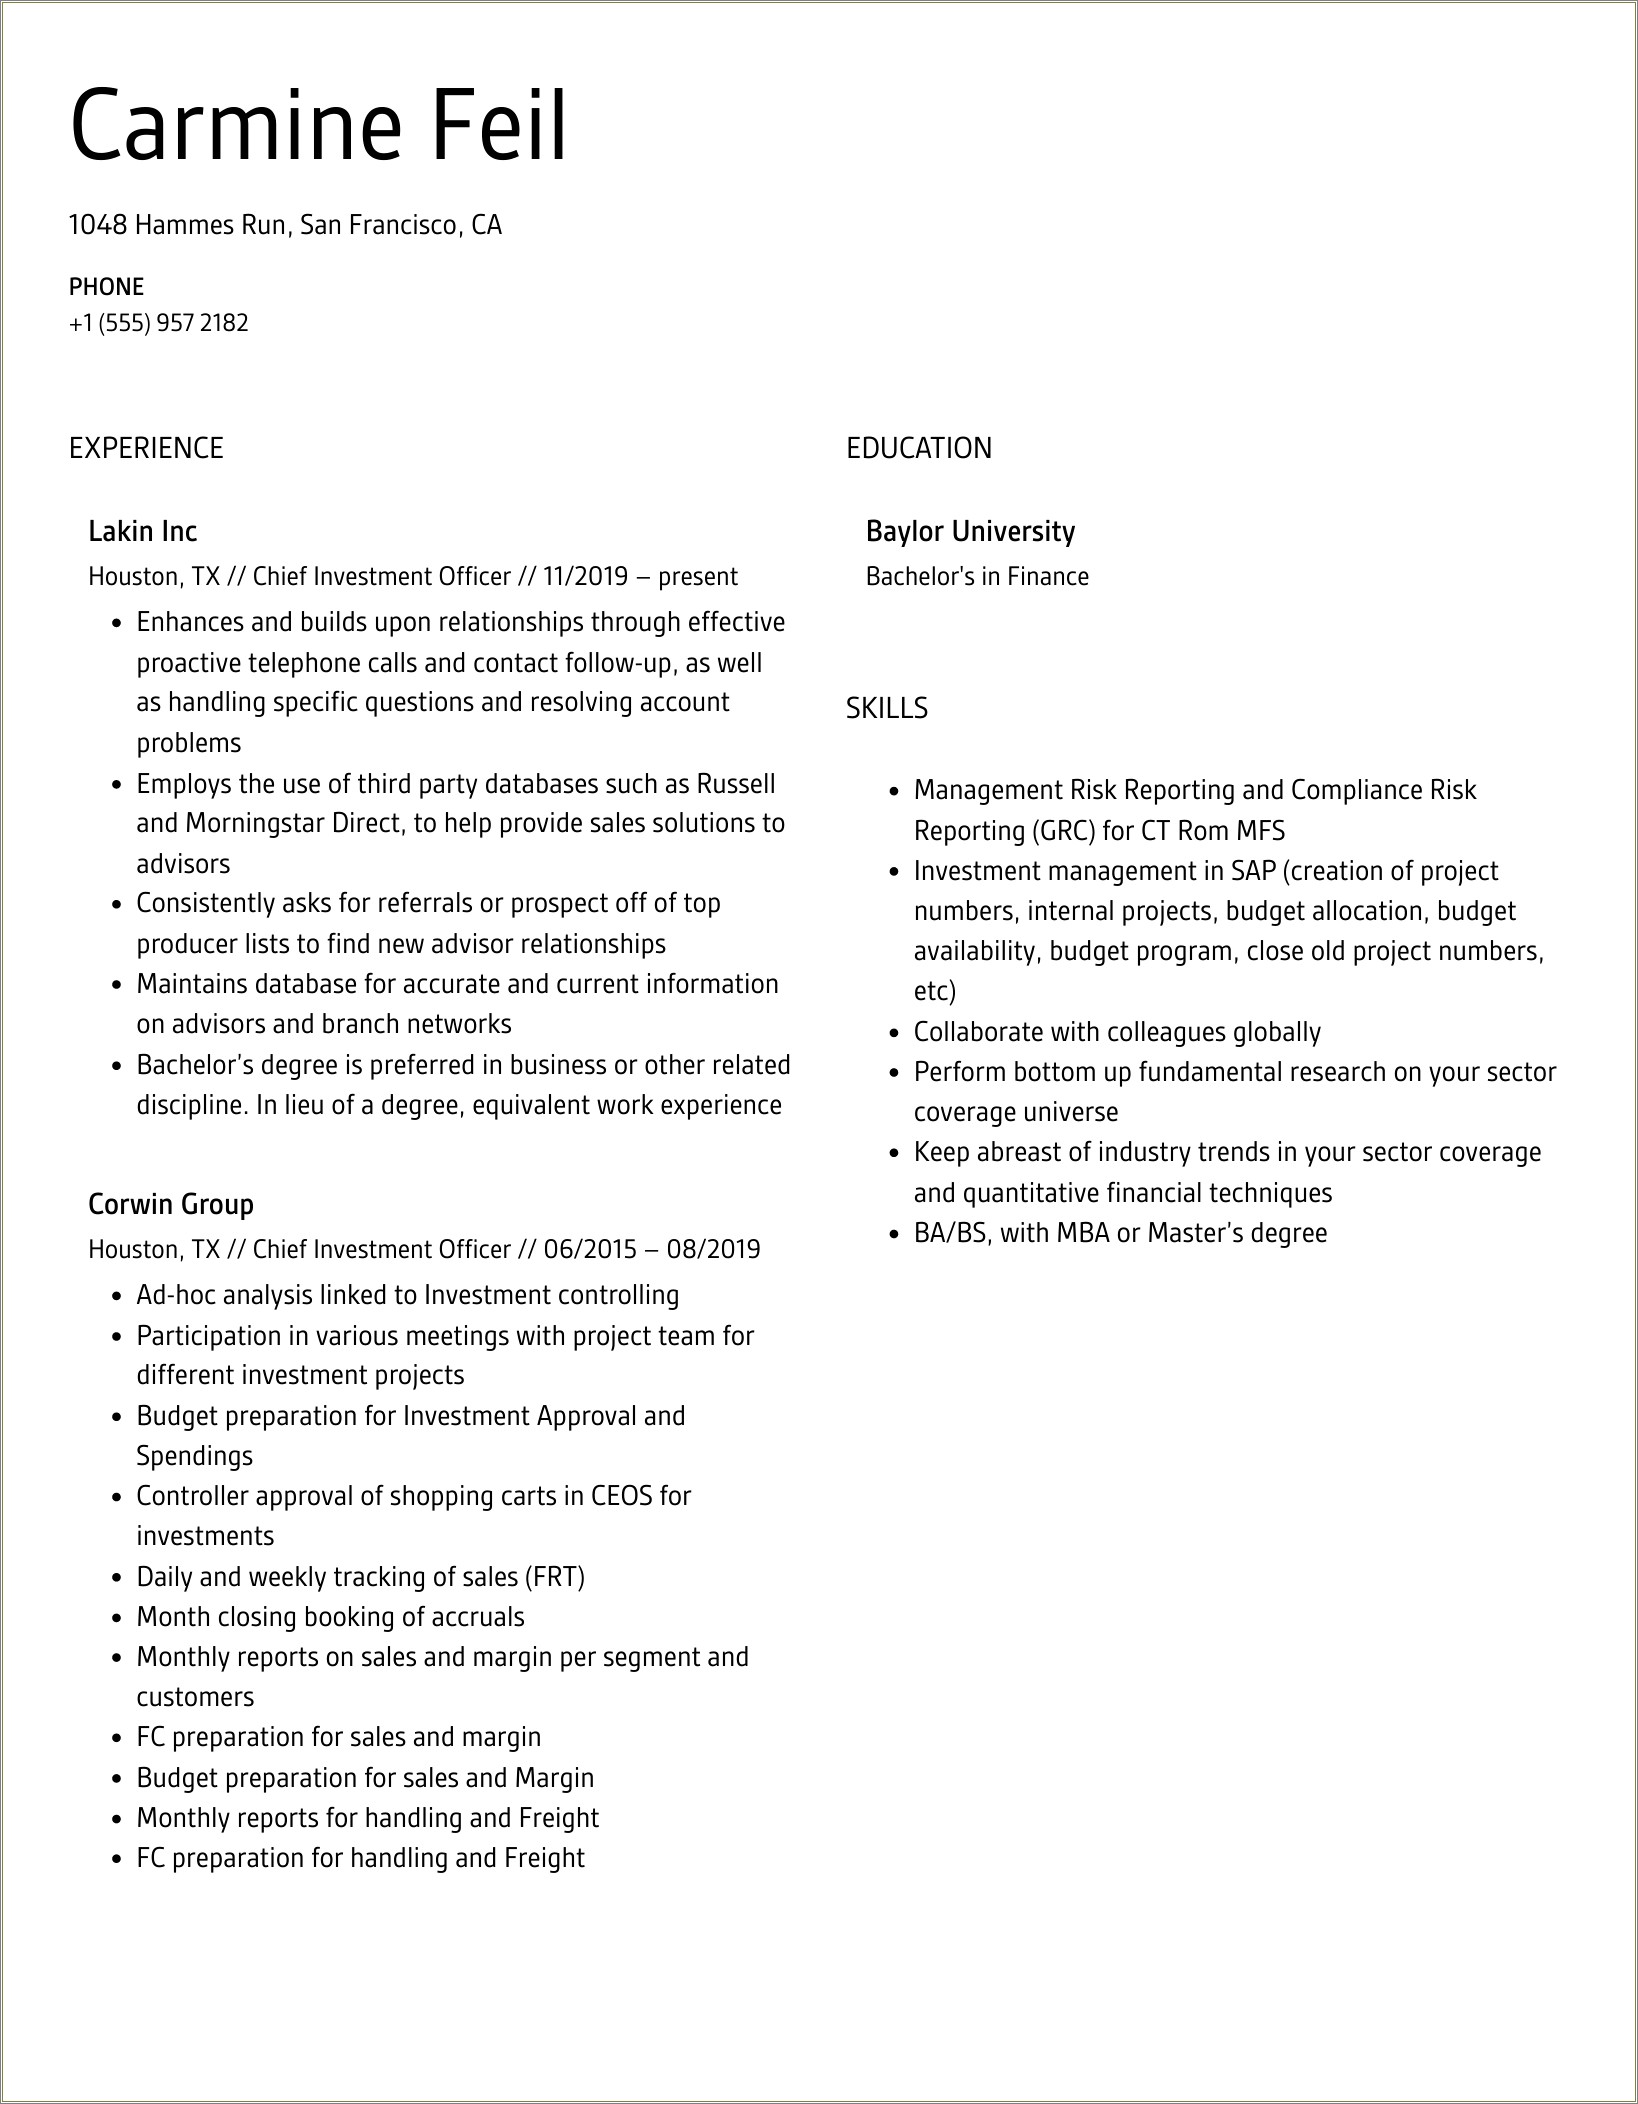 Resume Summary For Chief Investmen Tofficer